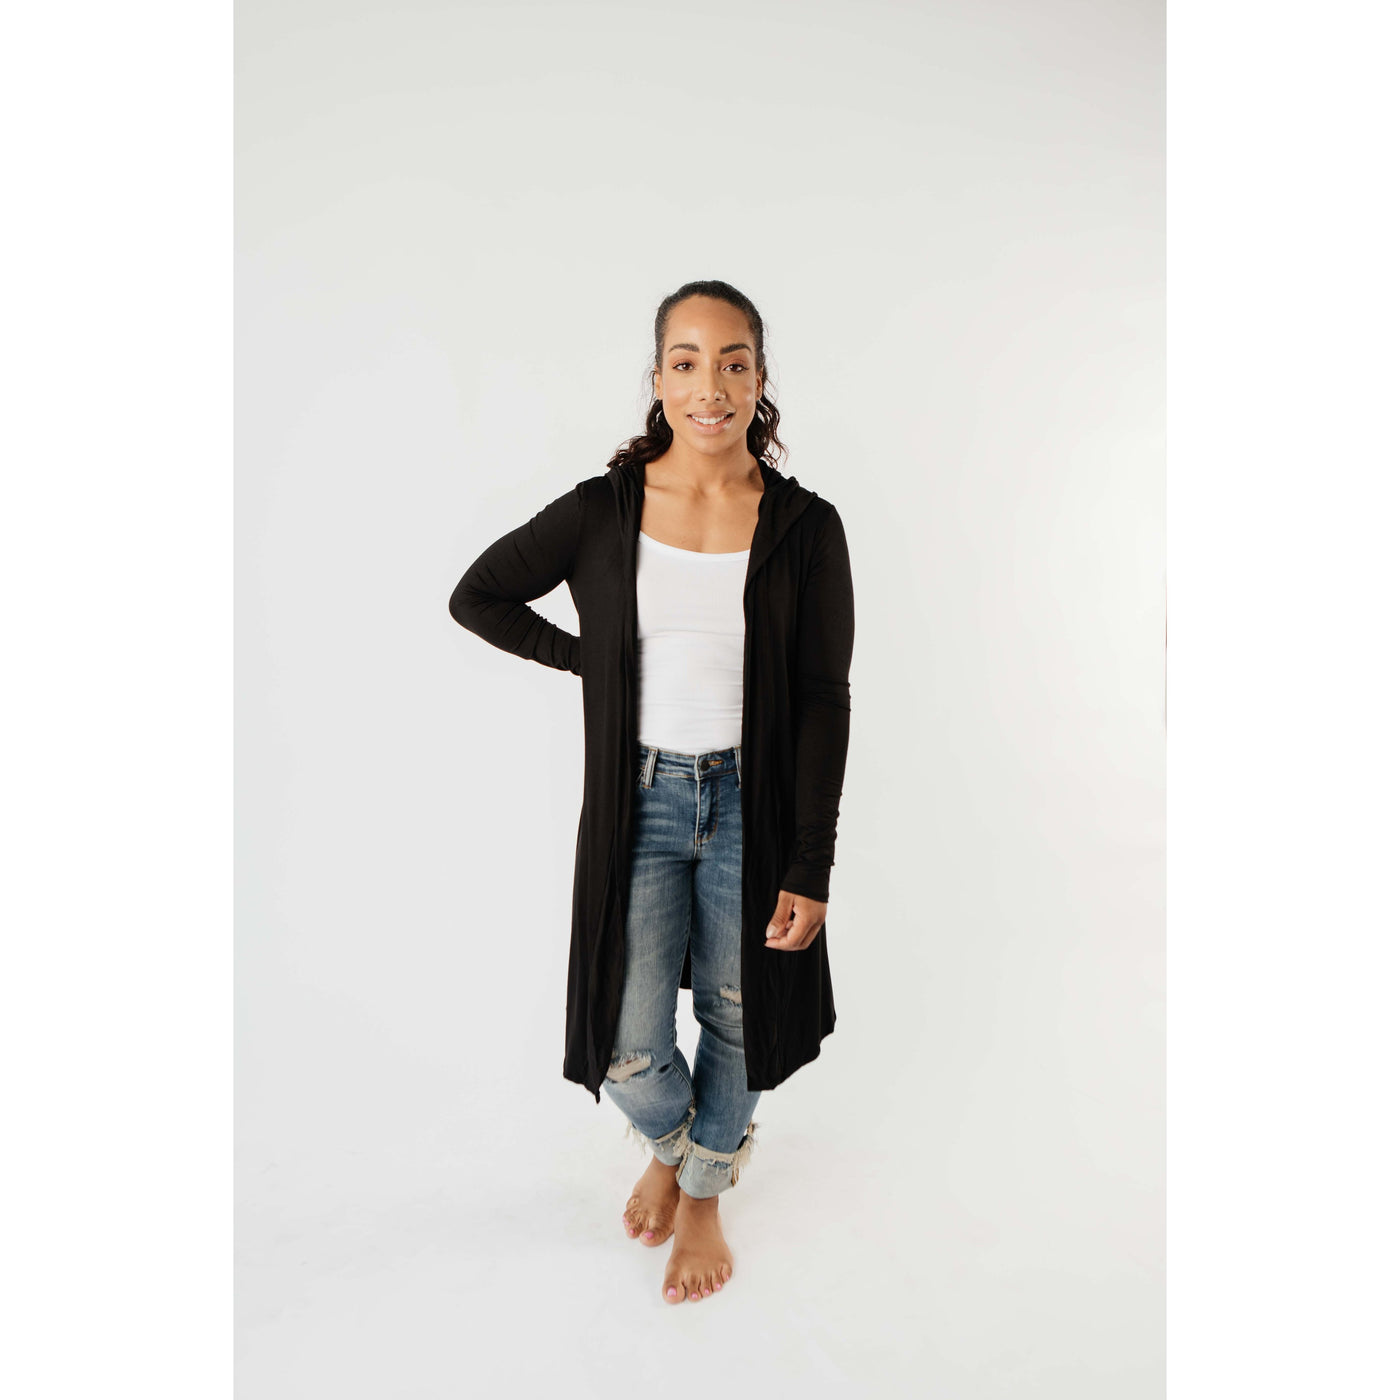 Between Seasons Cardigan In Black-W Top-Graceful & Chic Boutique, Family Clothing Store in Waxahachie, Texas